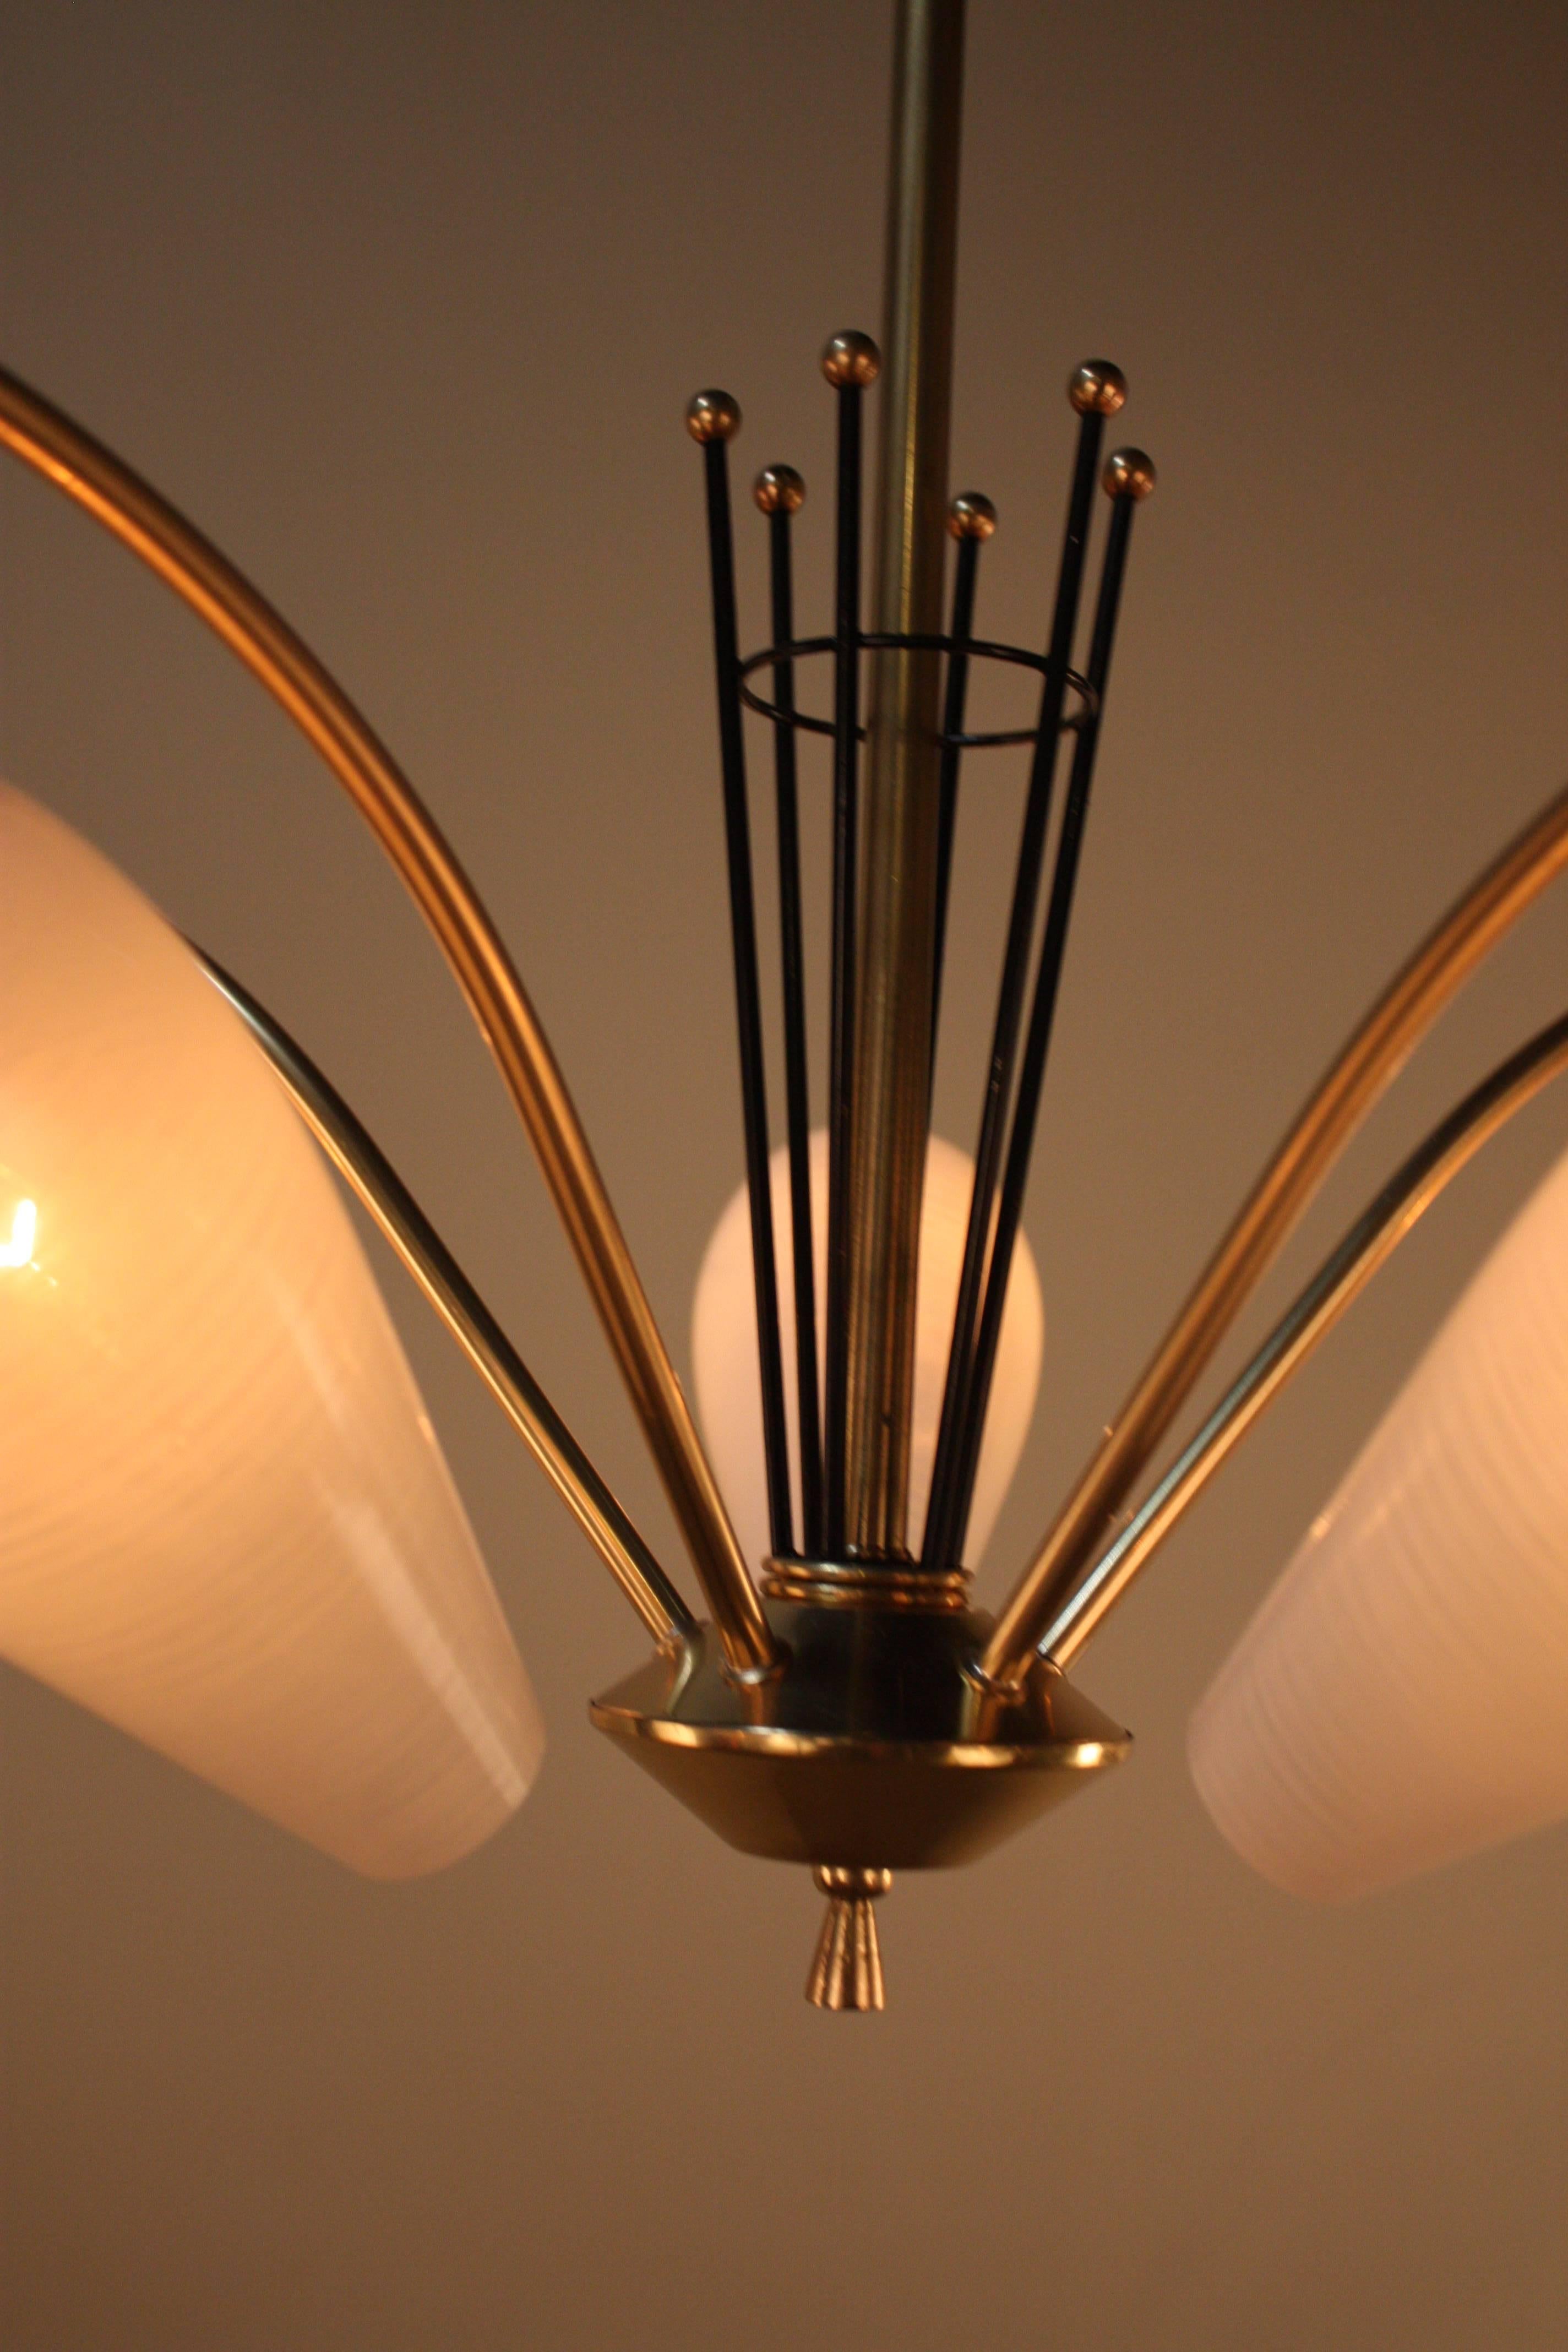 A midcentury five-light textured glass shades chandelier with satin bronze and back lacquer frame.
The height can be reduced by cutting the centre rod.